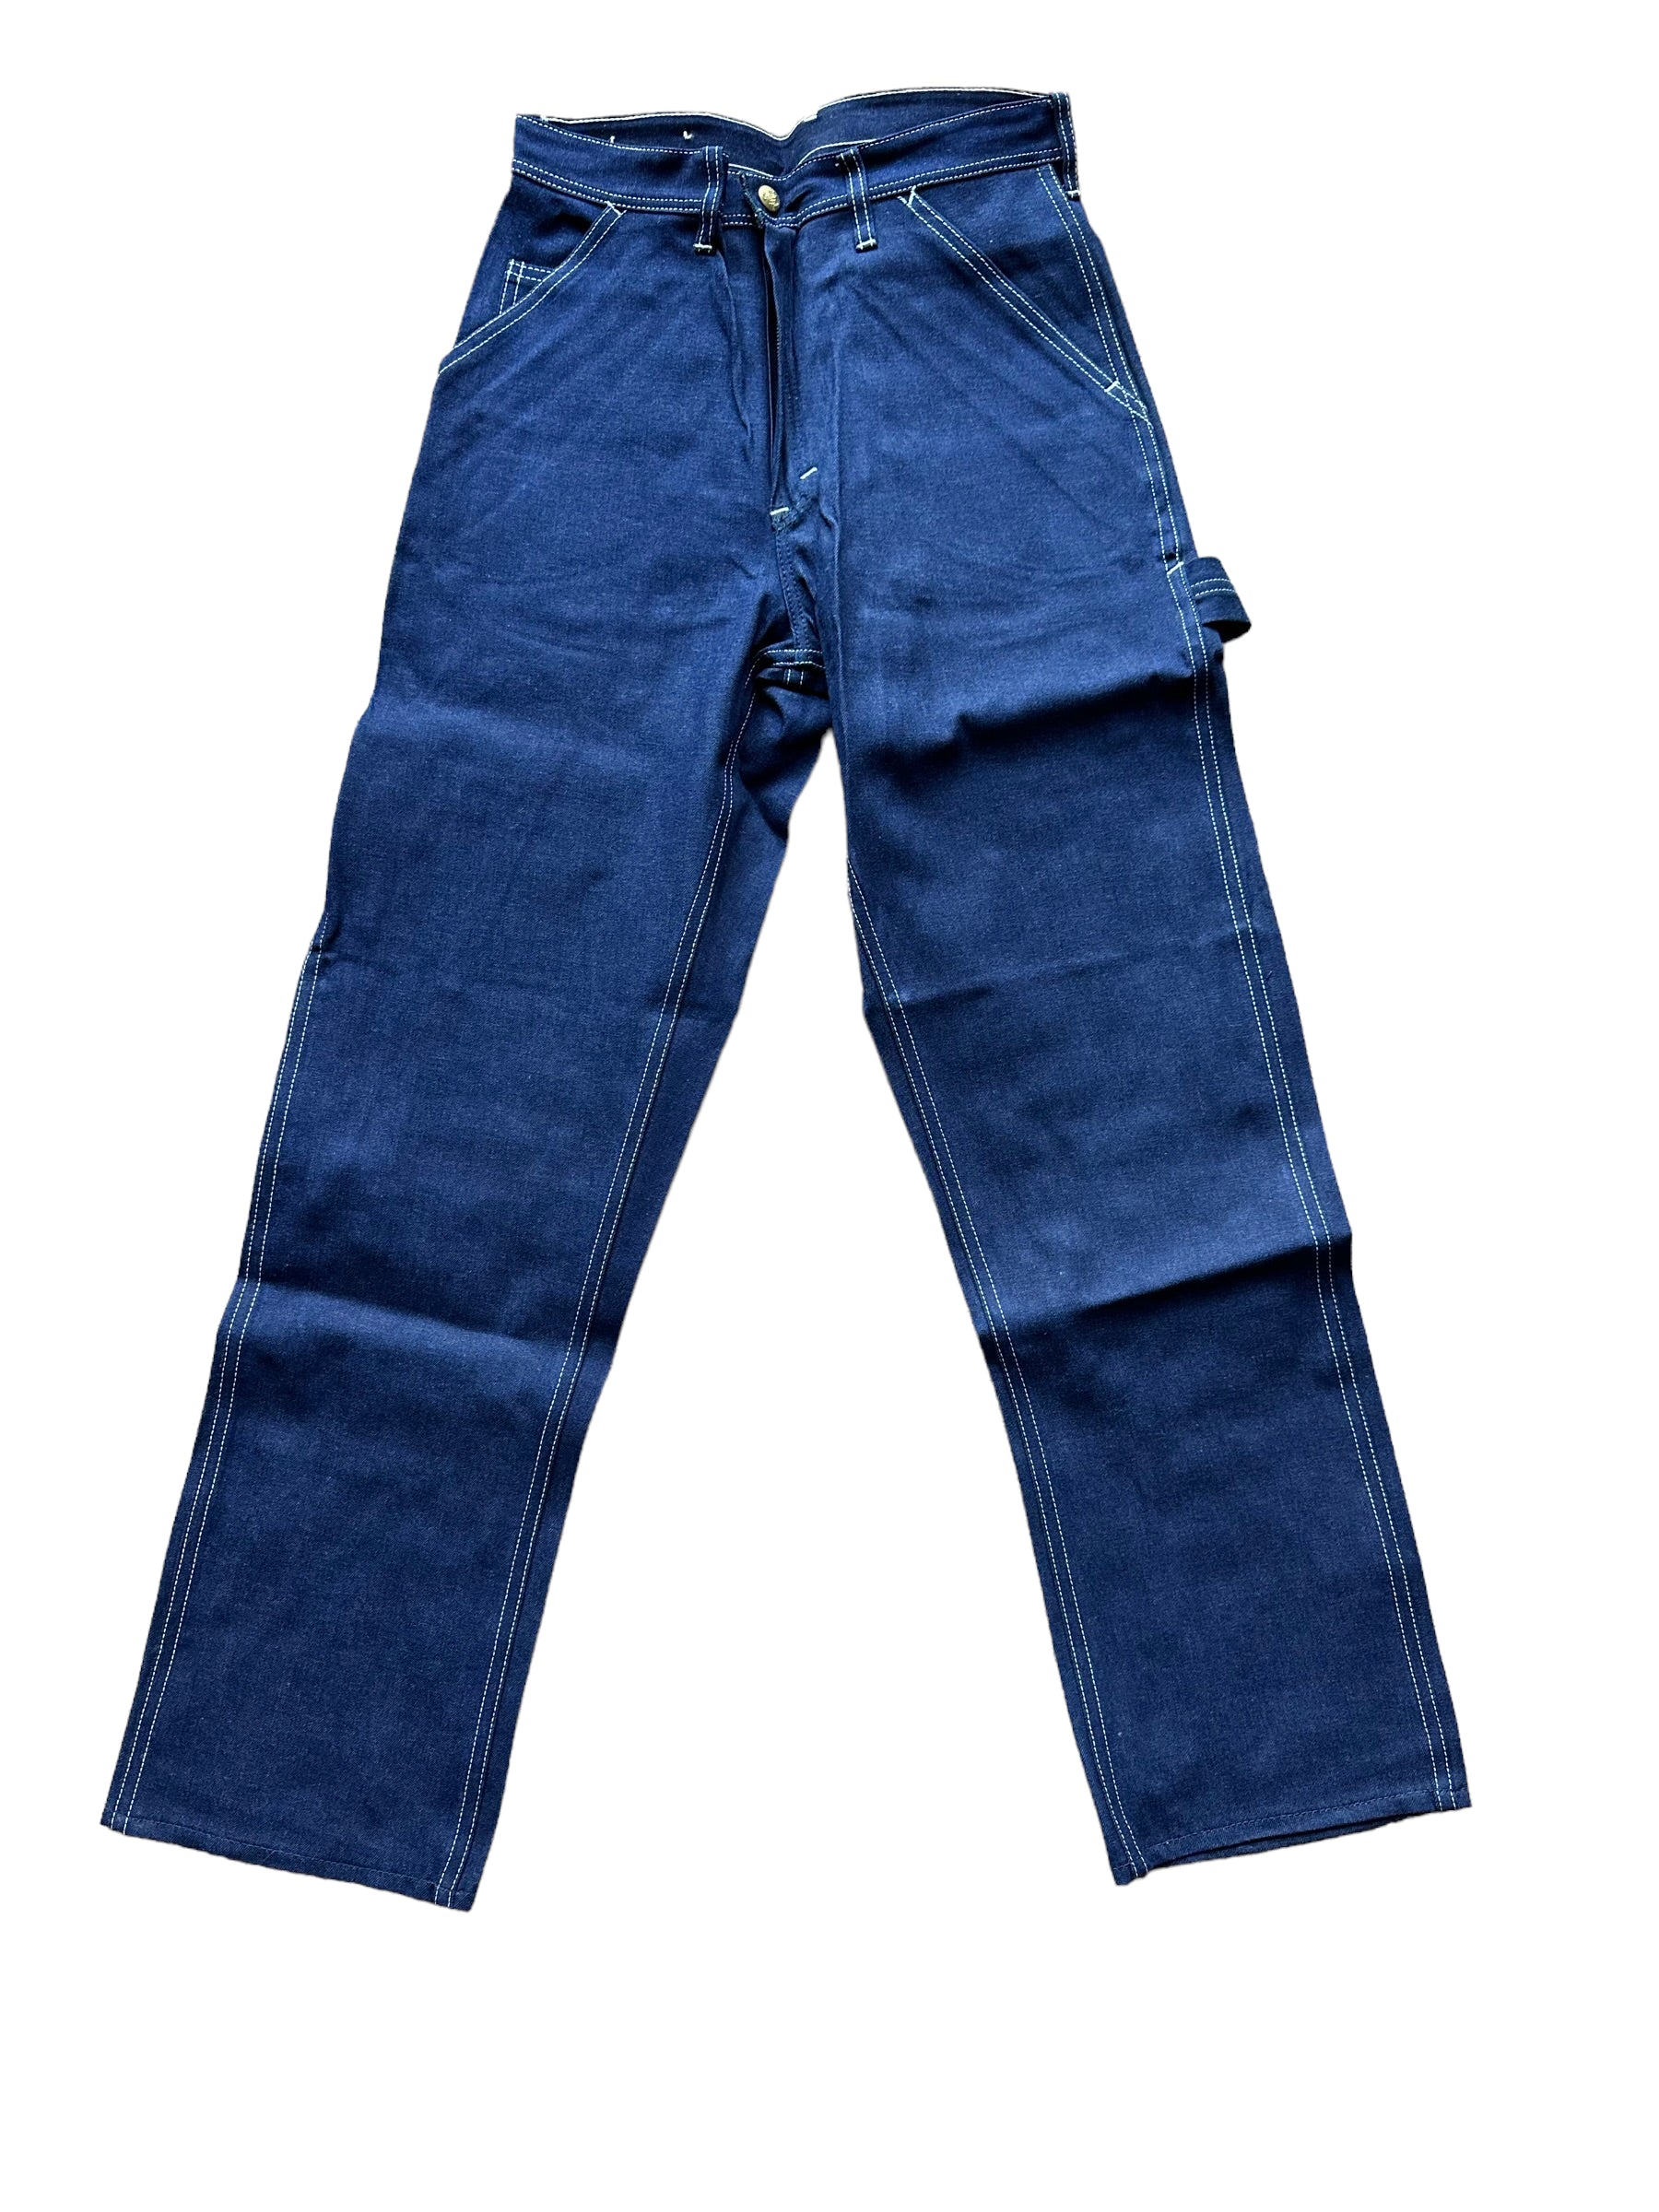 Front View of New Old Stock Vintage Carter's Carpenter Dungarees W29 L30 | Vintage Workwear Seattle